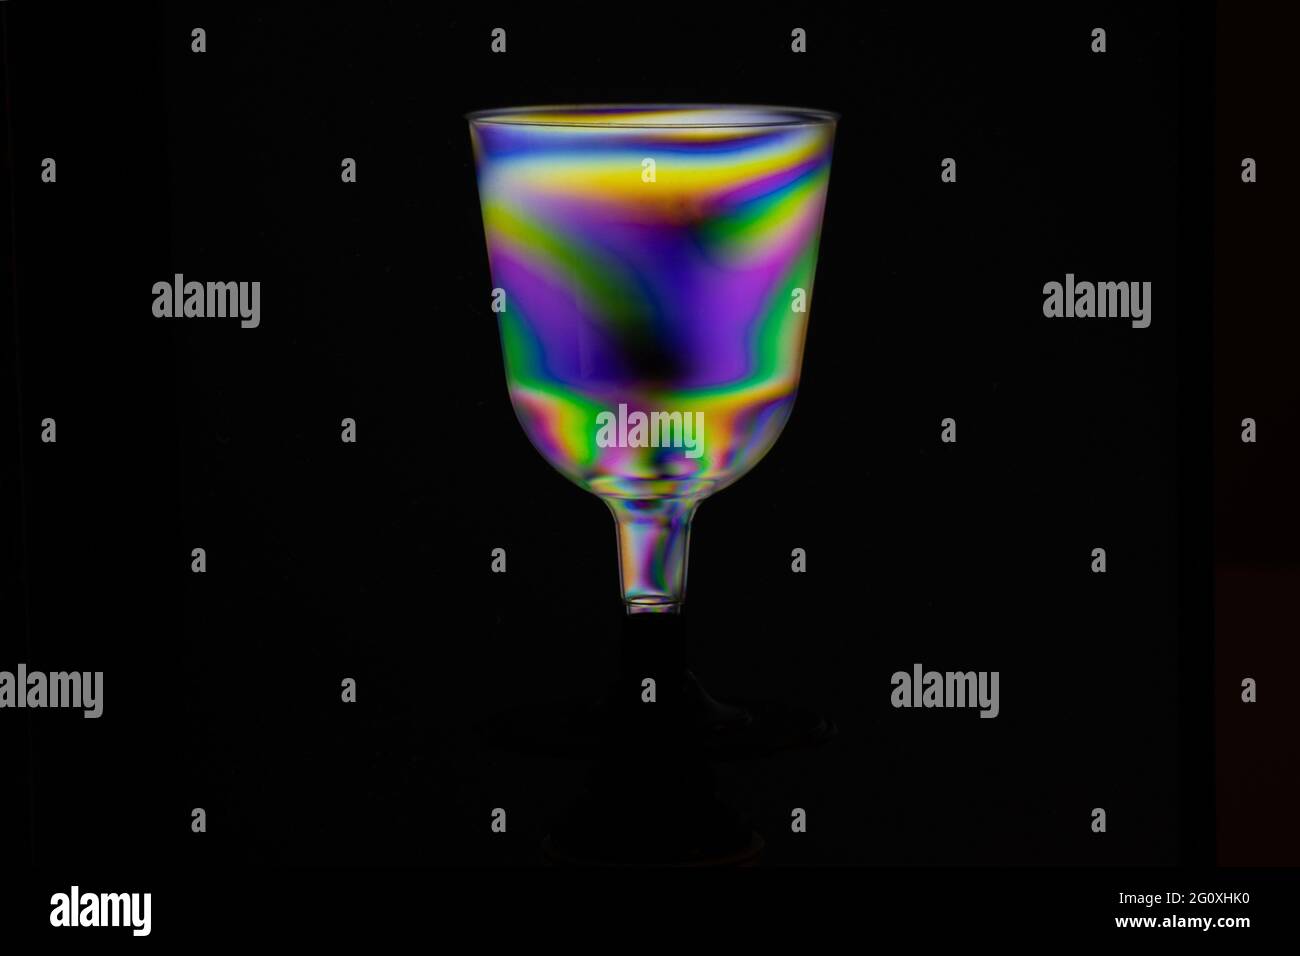 Transparent hovering plastic cup, polarized rainbow colored isolated on black background. Synthwave modern futuristic look. Stock Photo